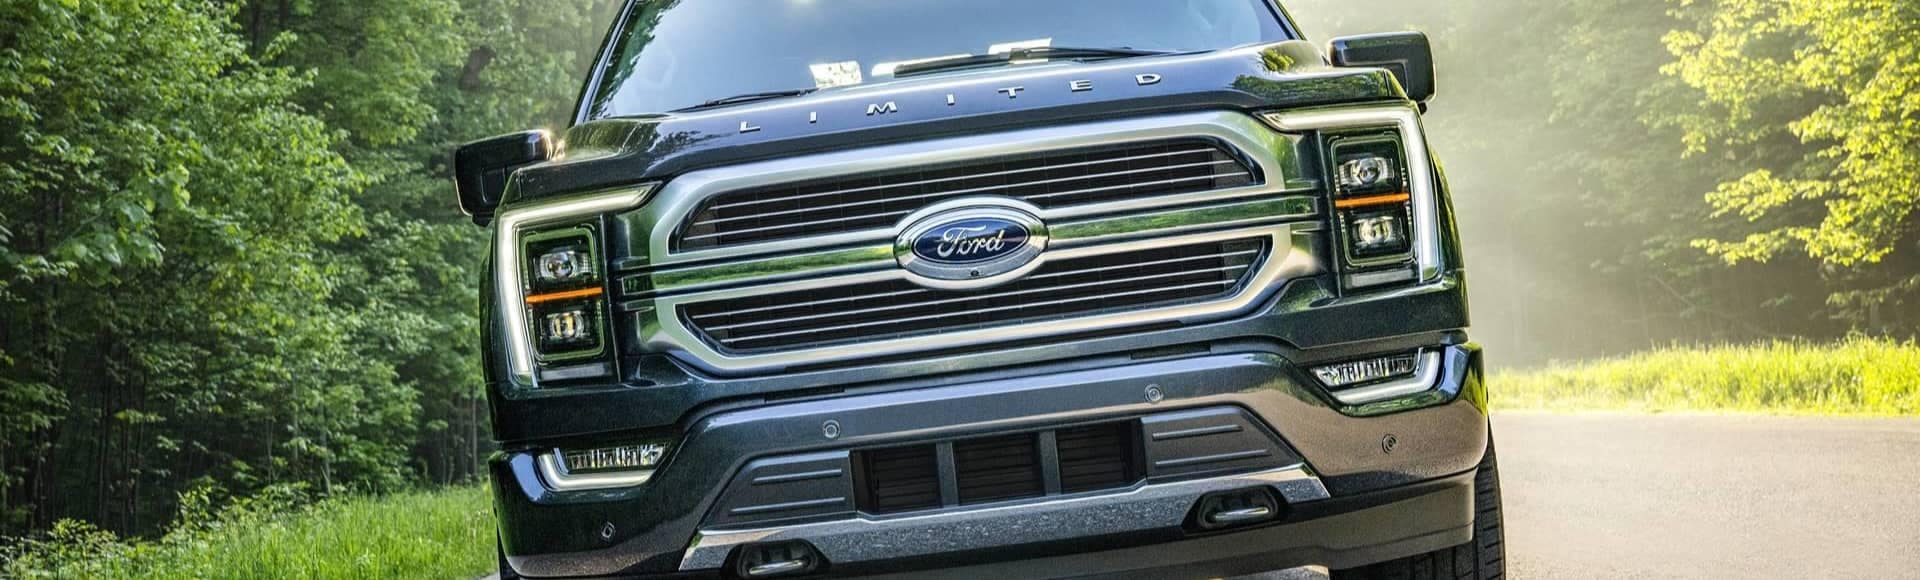 Ford truck front with grill.